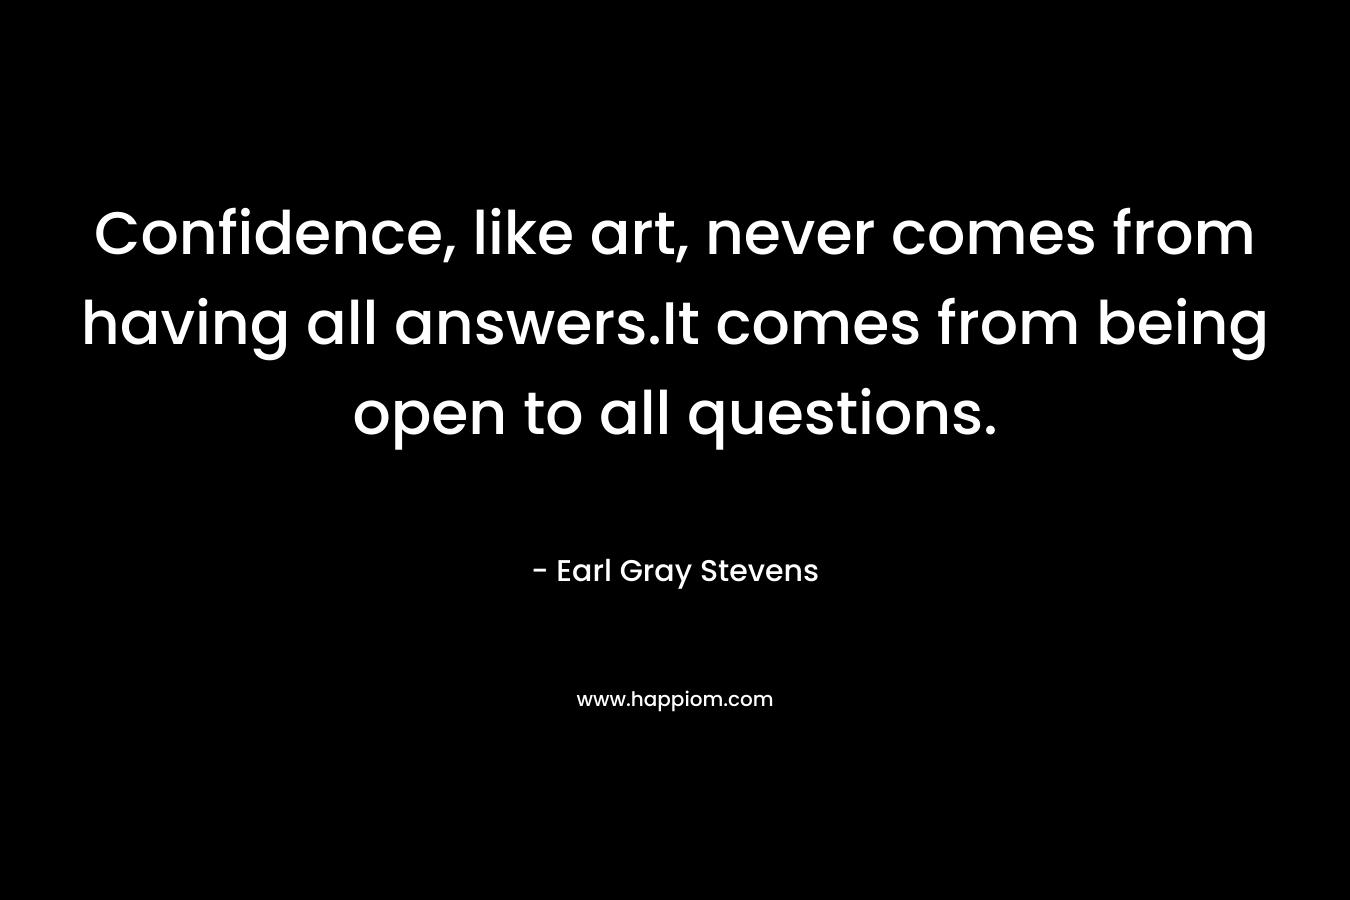 Confidence, like art, never comes from having all answers.It comes from being open to all questions.